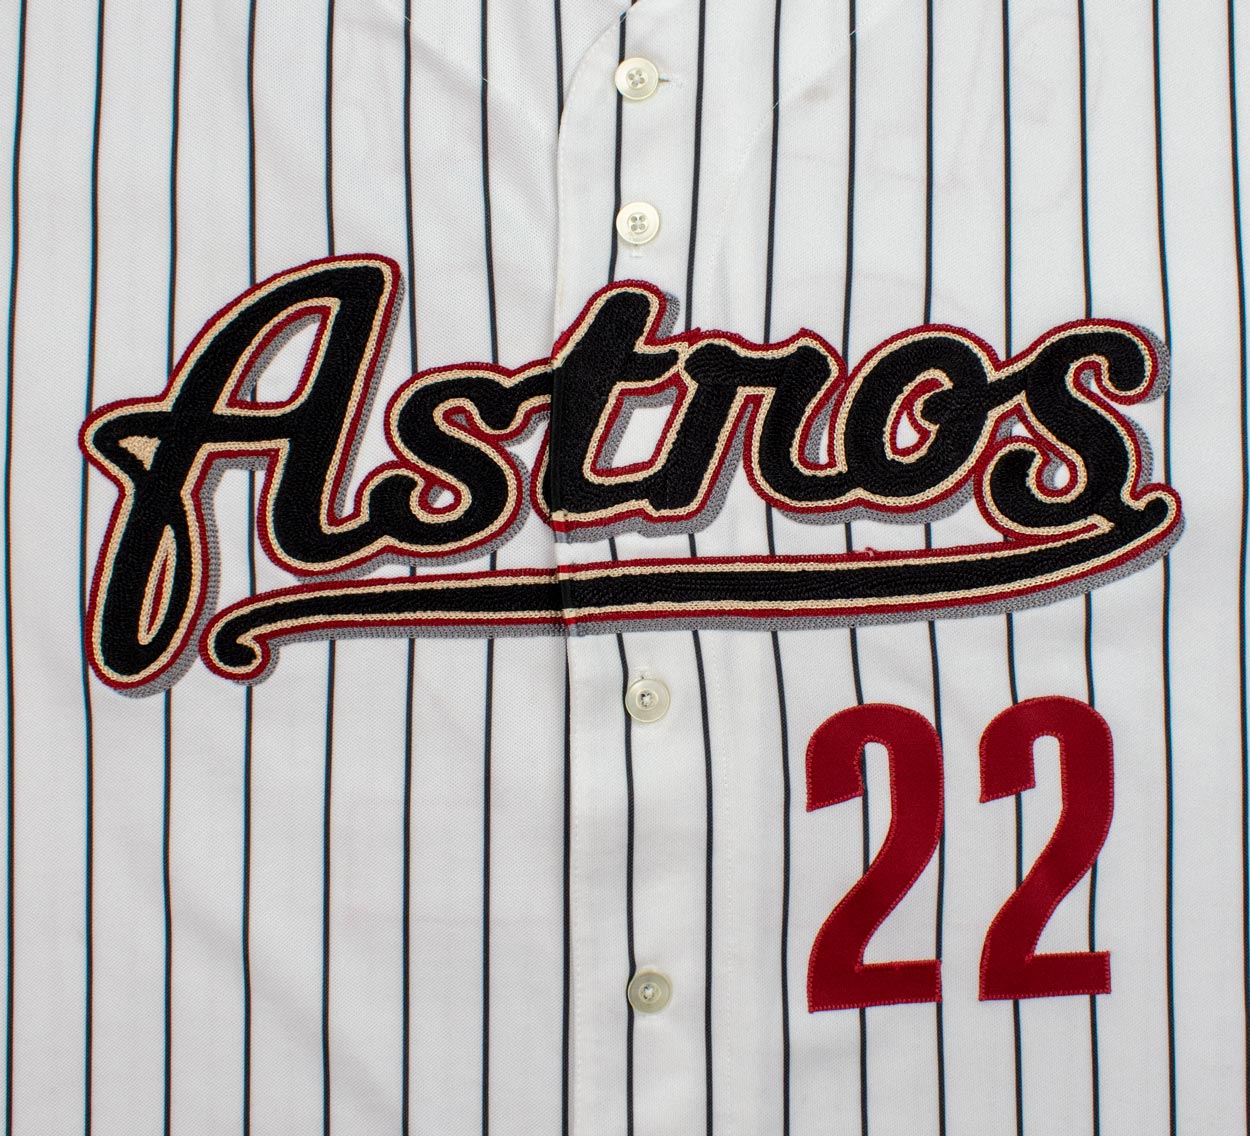 Tristar Roger Clemens Autographed Houston Astros Brick Jersey with 2005 World Series Patch